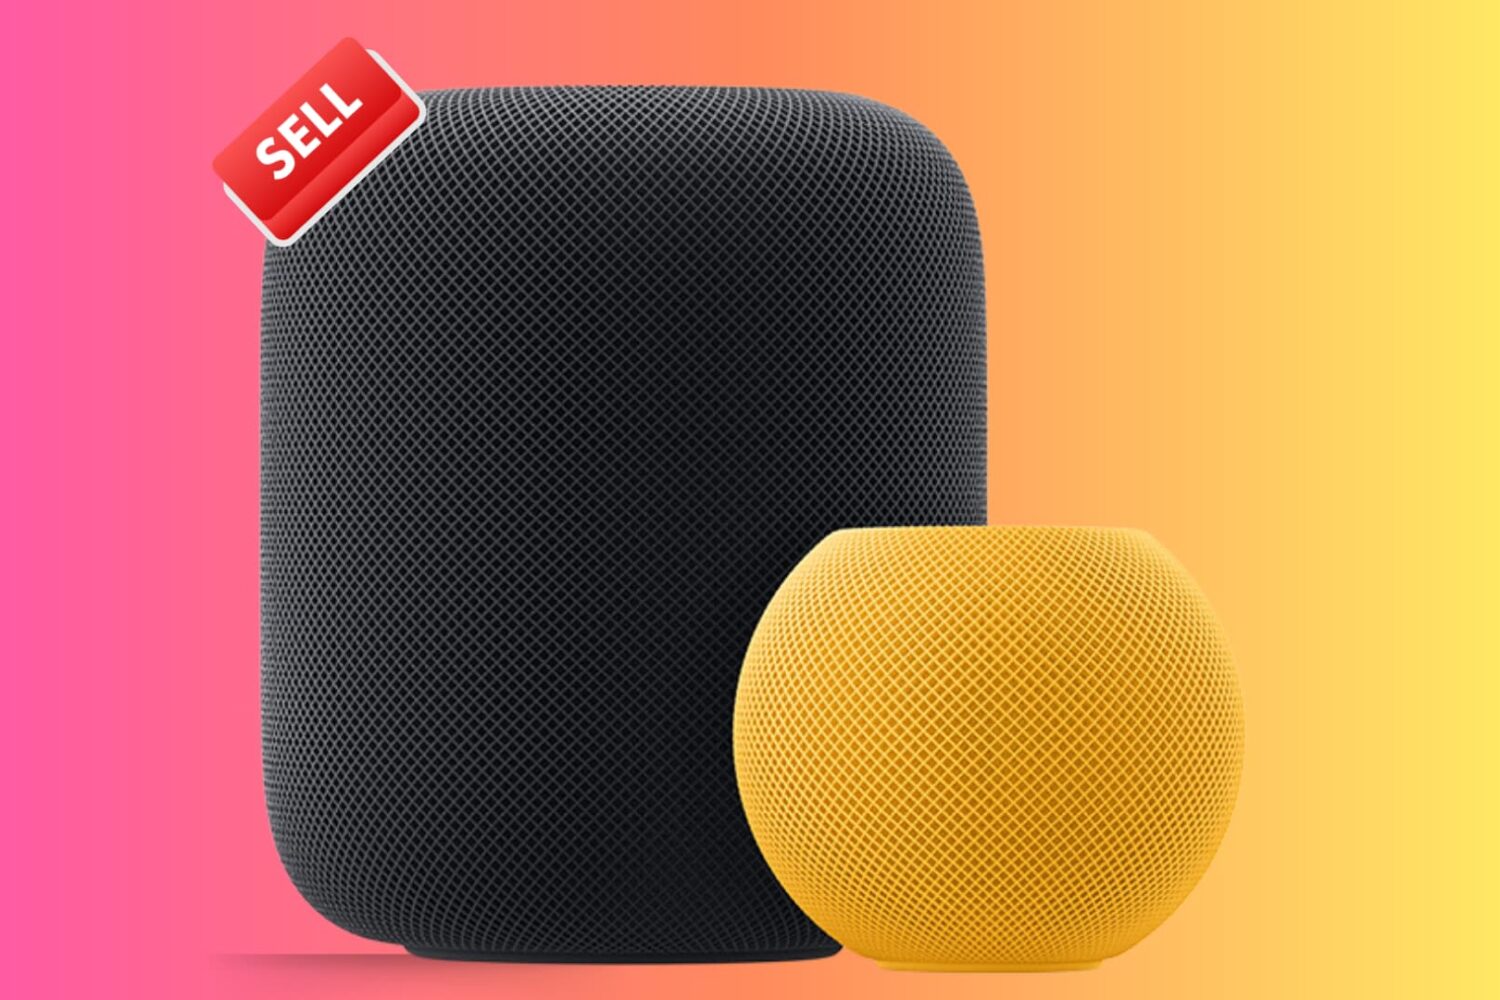 Black full size HomePod and yellow HomePod mini with a red Sell tag